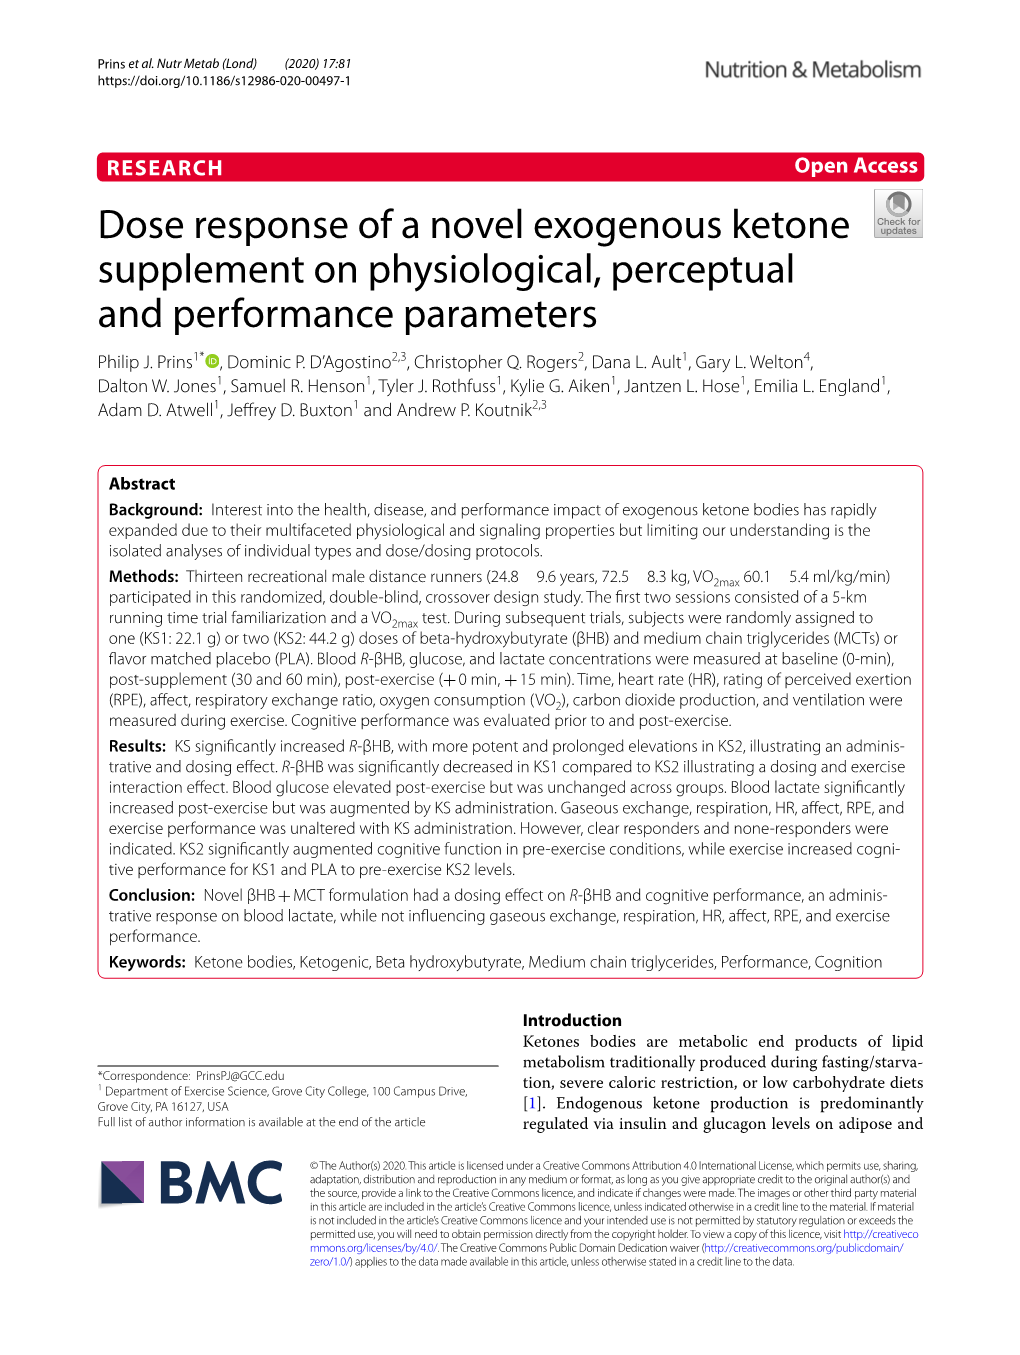 Dose Response of a Novel Exogenous Ketone Supplement on Physiological, Perceptual and Performance Parameters Philip J